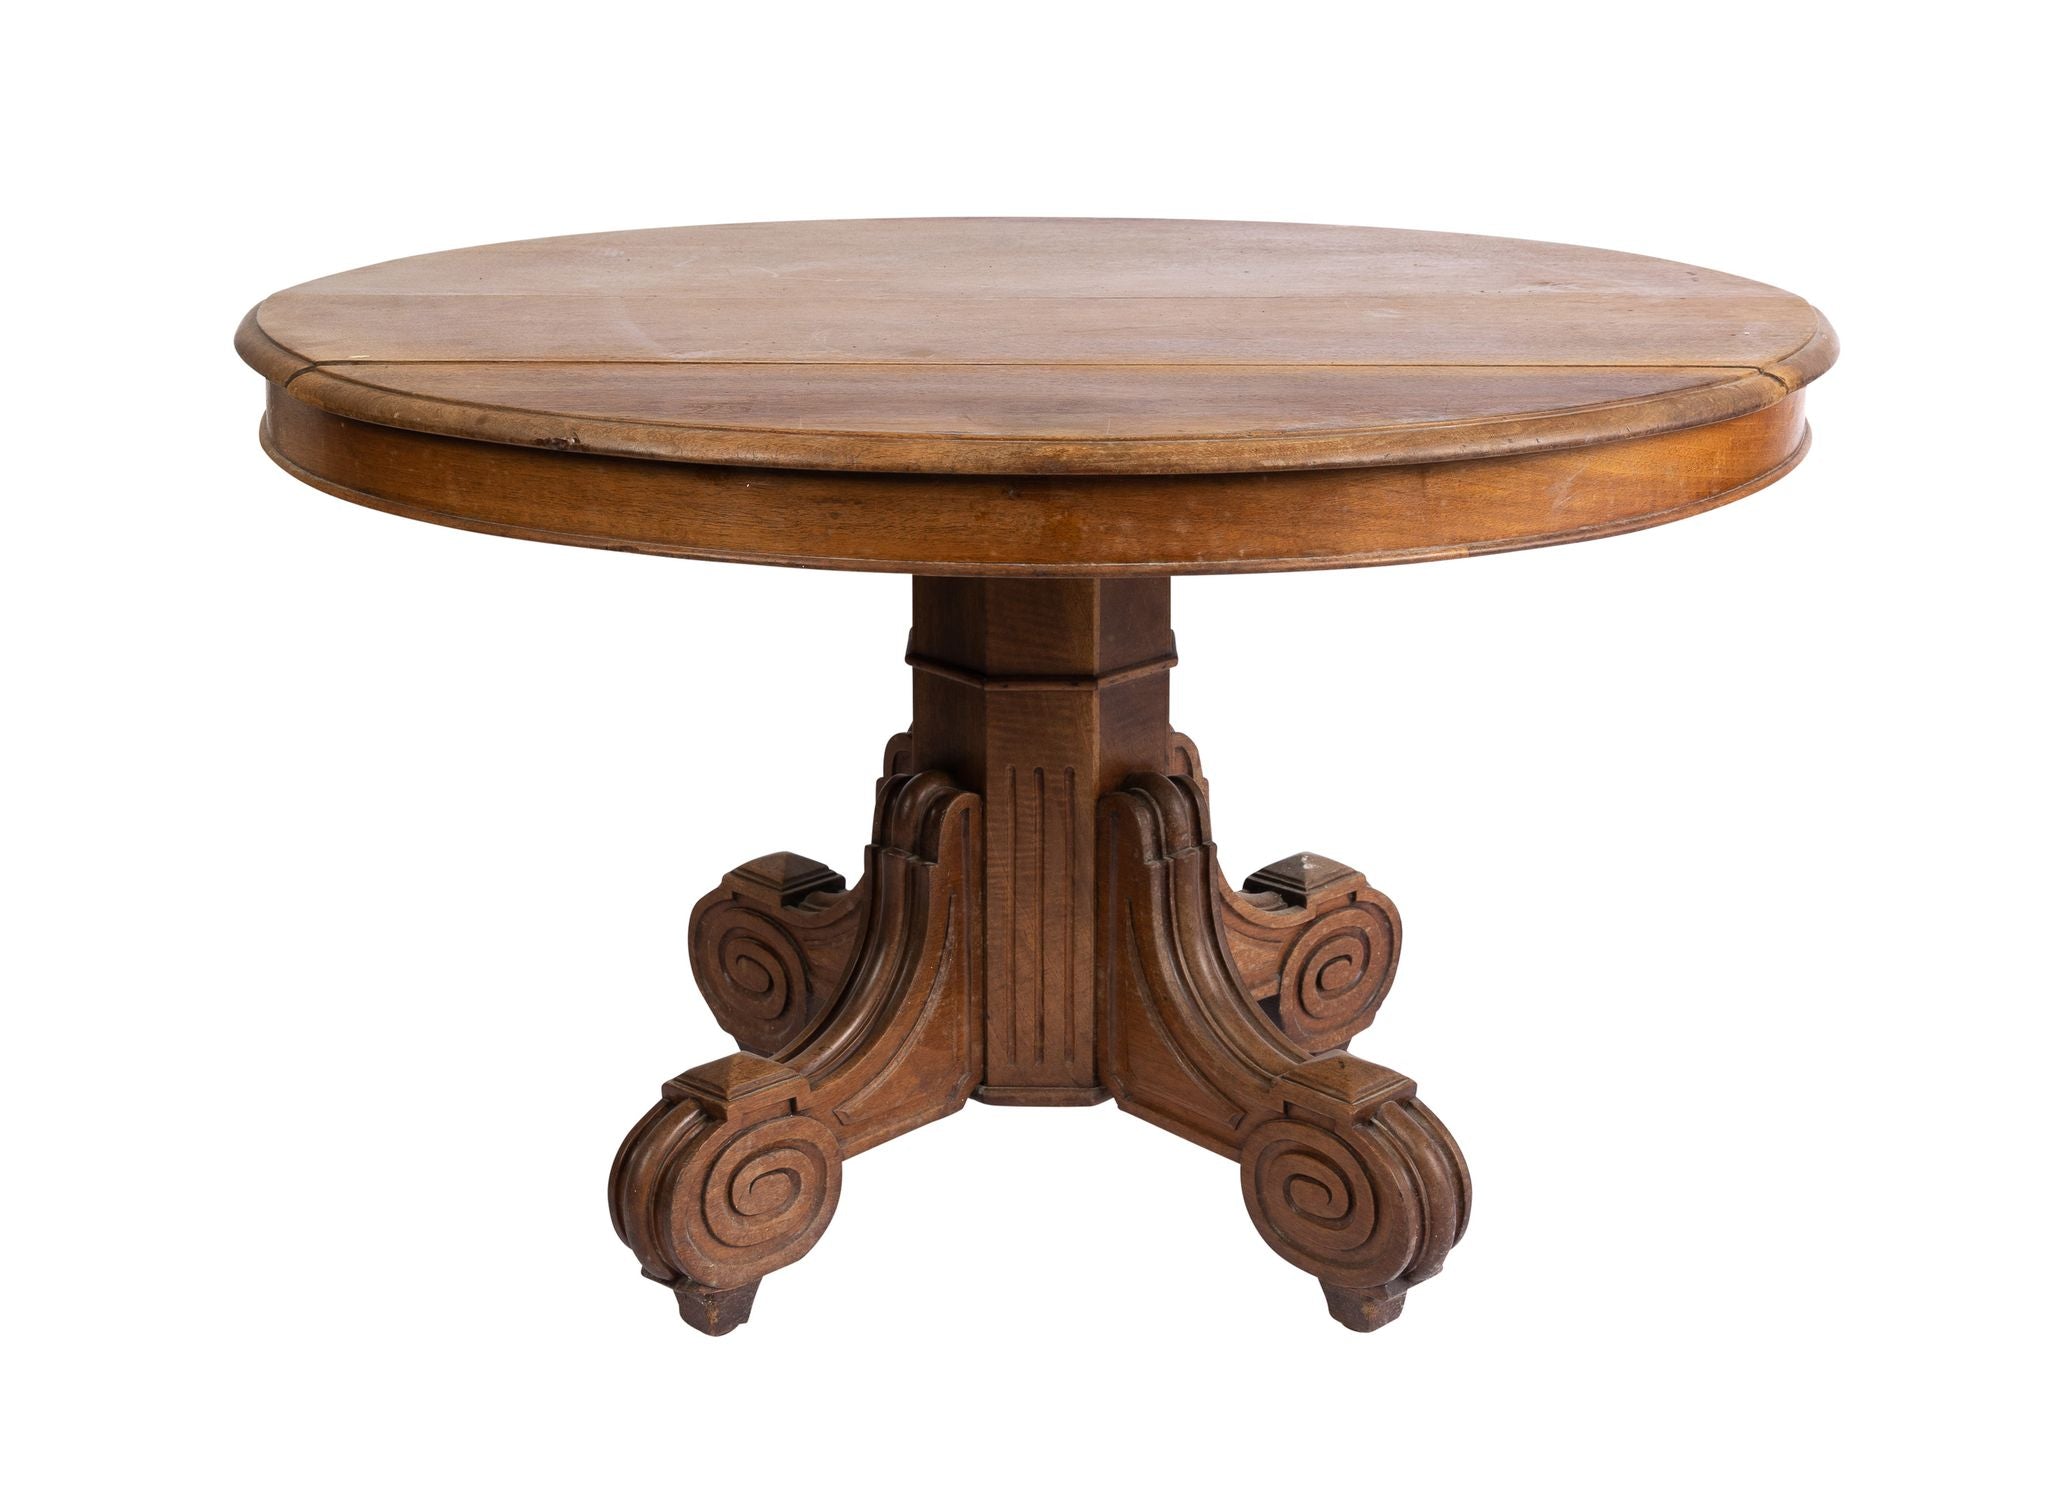 A stunning early 20th Century French oak pedestal table with impressive base